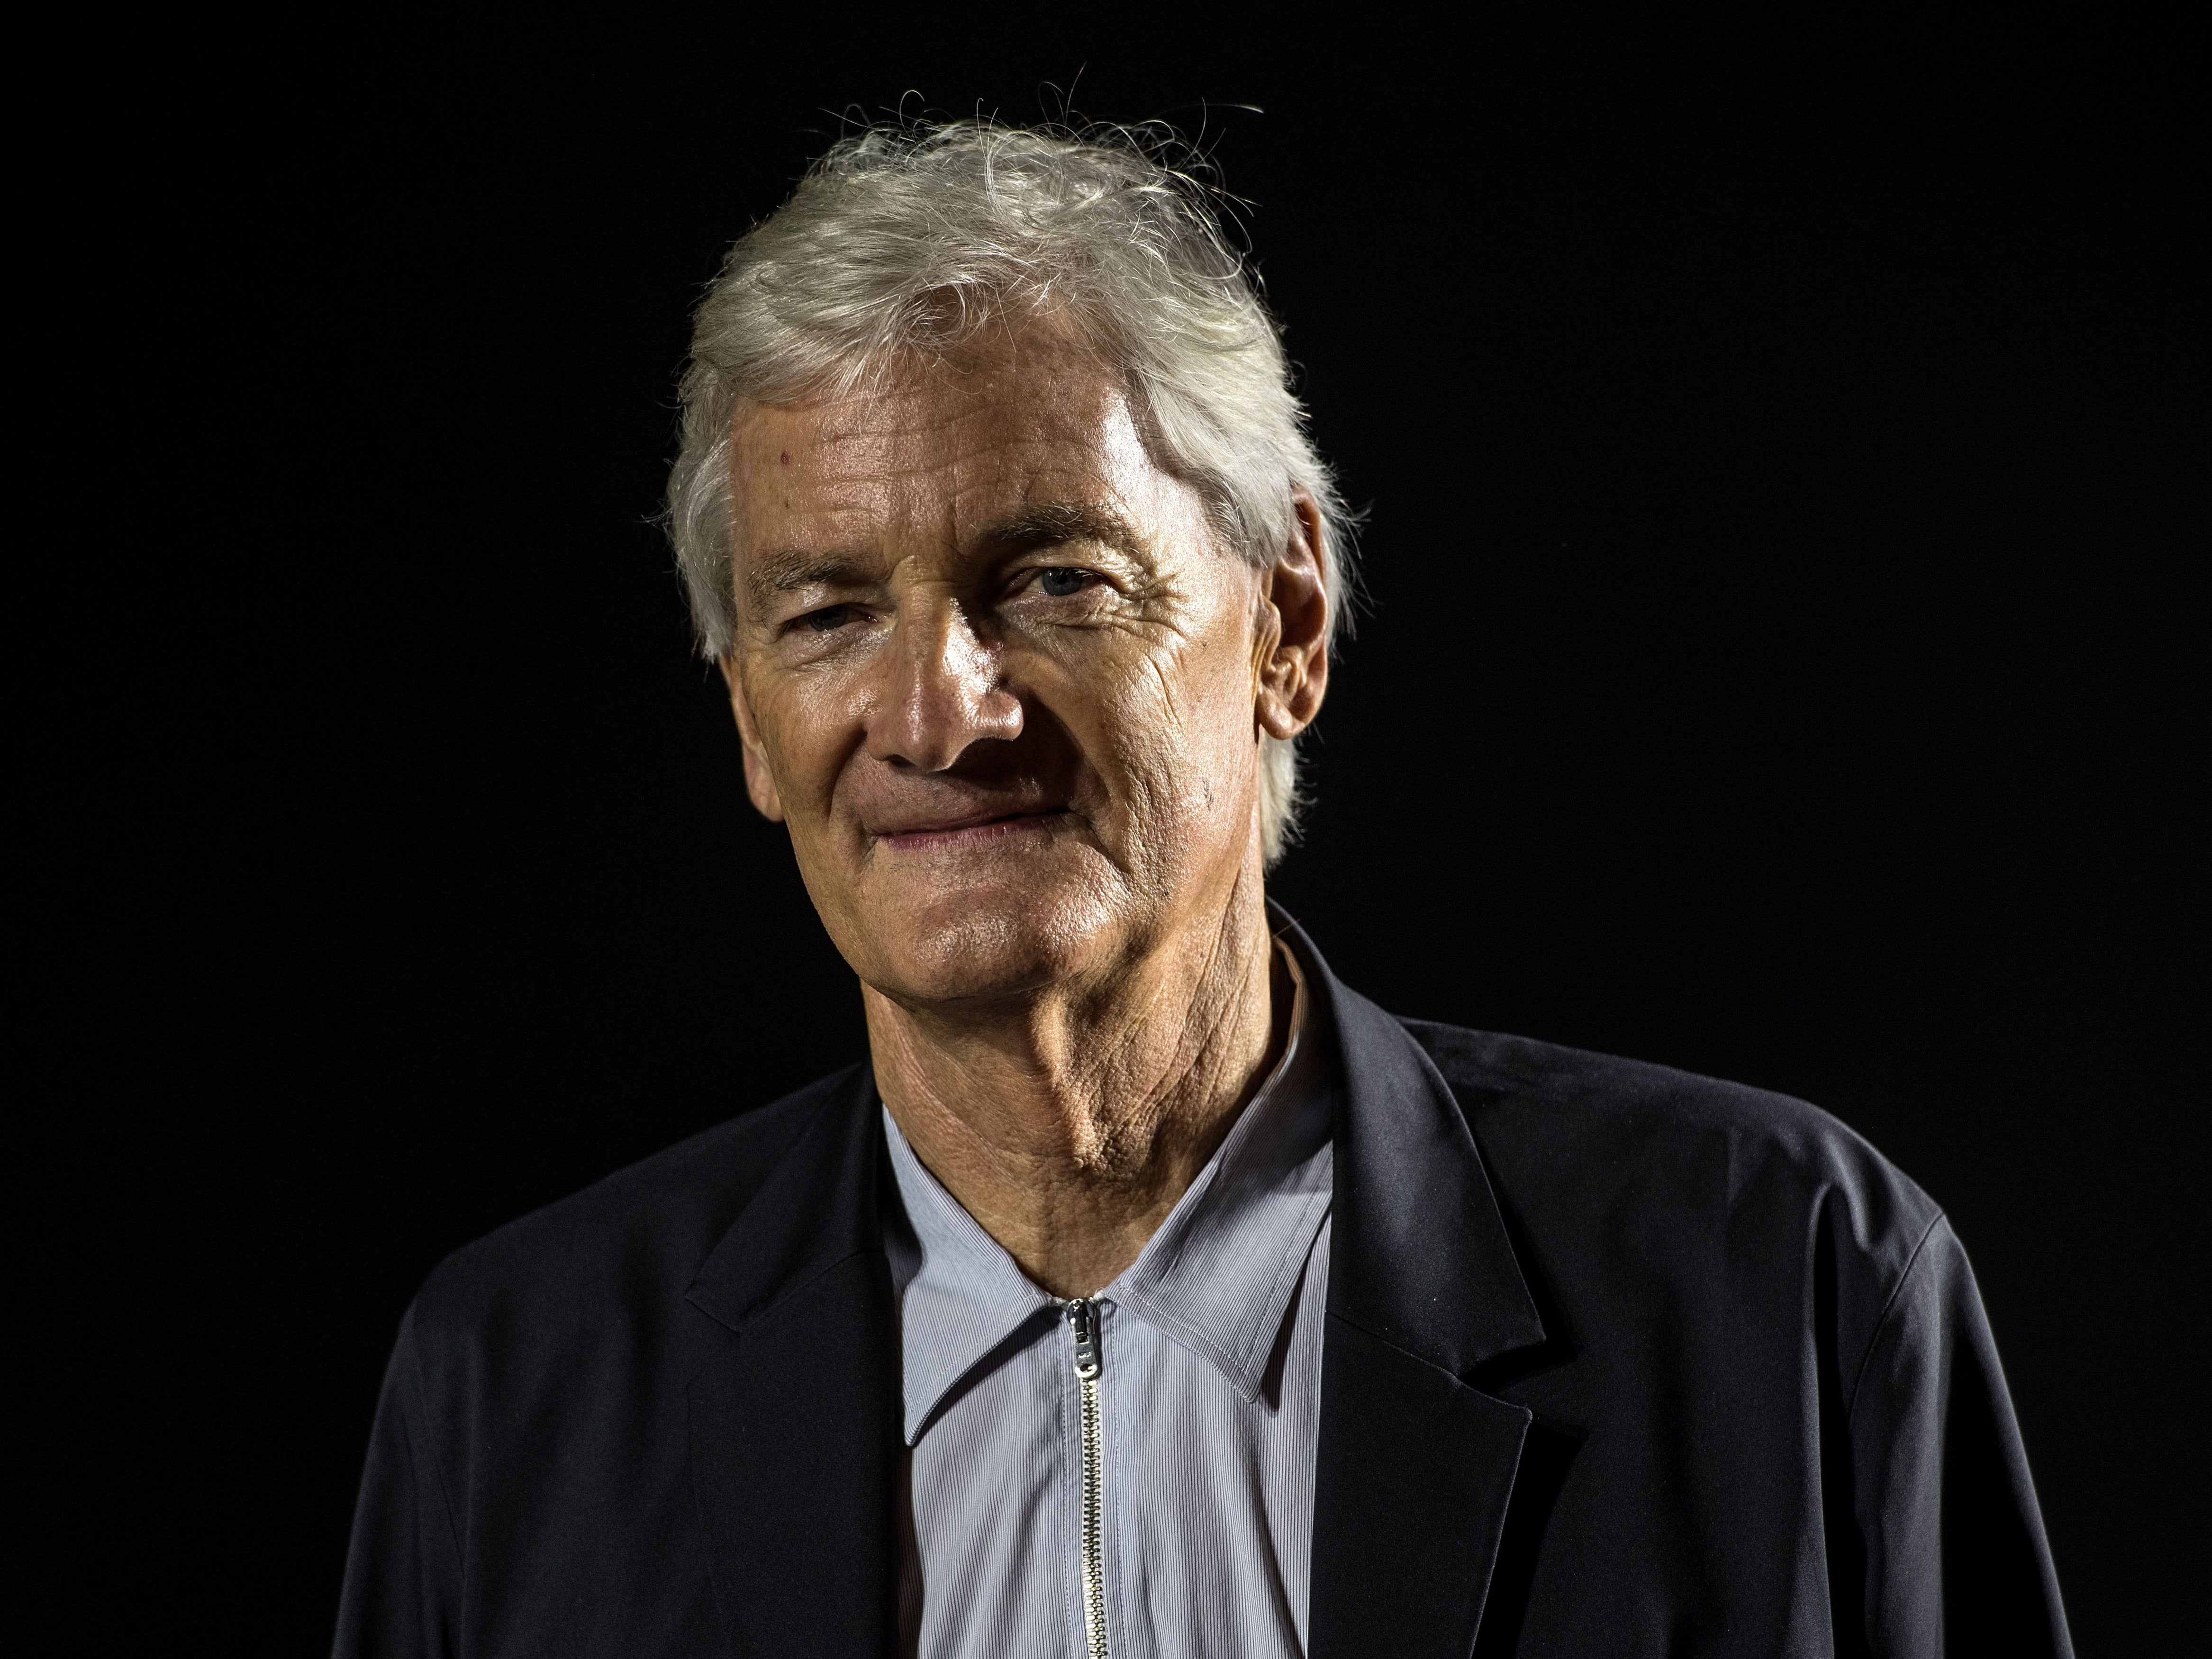 ‘We’ve got our freedom’ says Sir James Dyson – but at what cost for UK exporters to the EU?